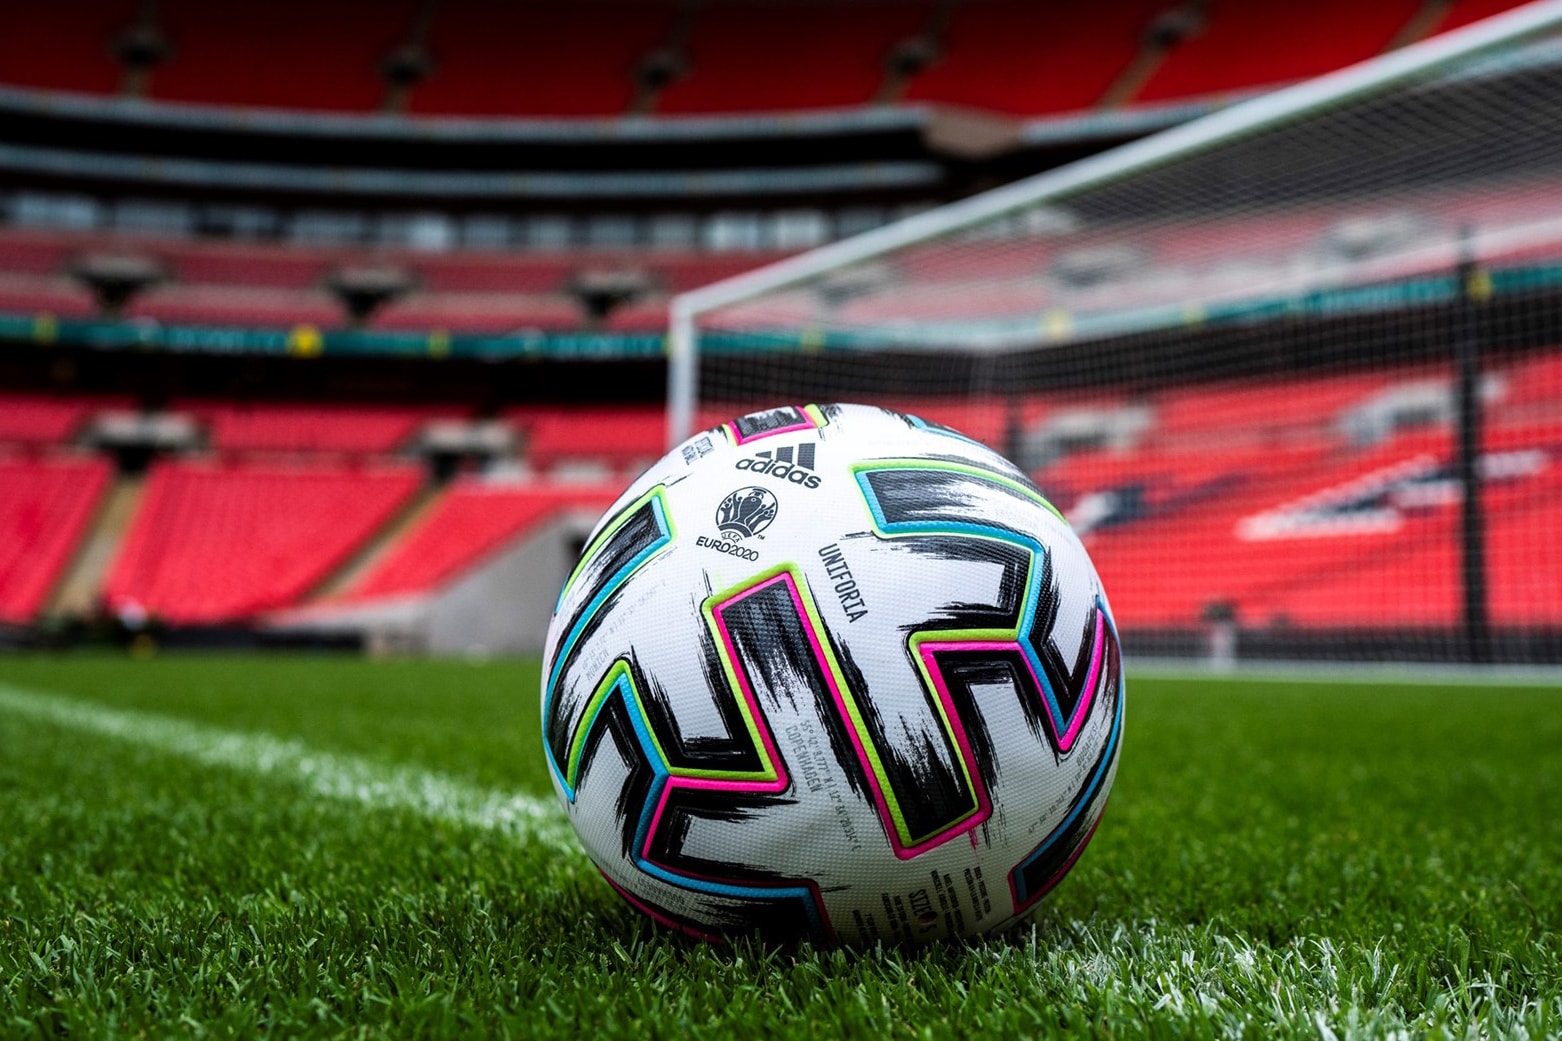 adidas unveil official match ball for 2023 Women's World Cup